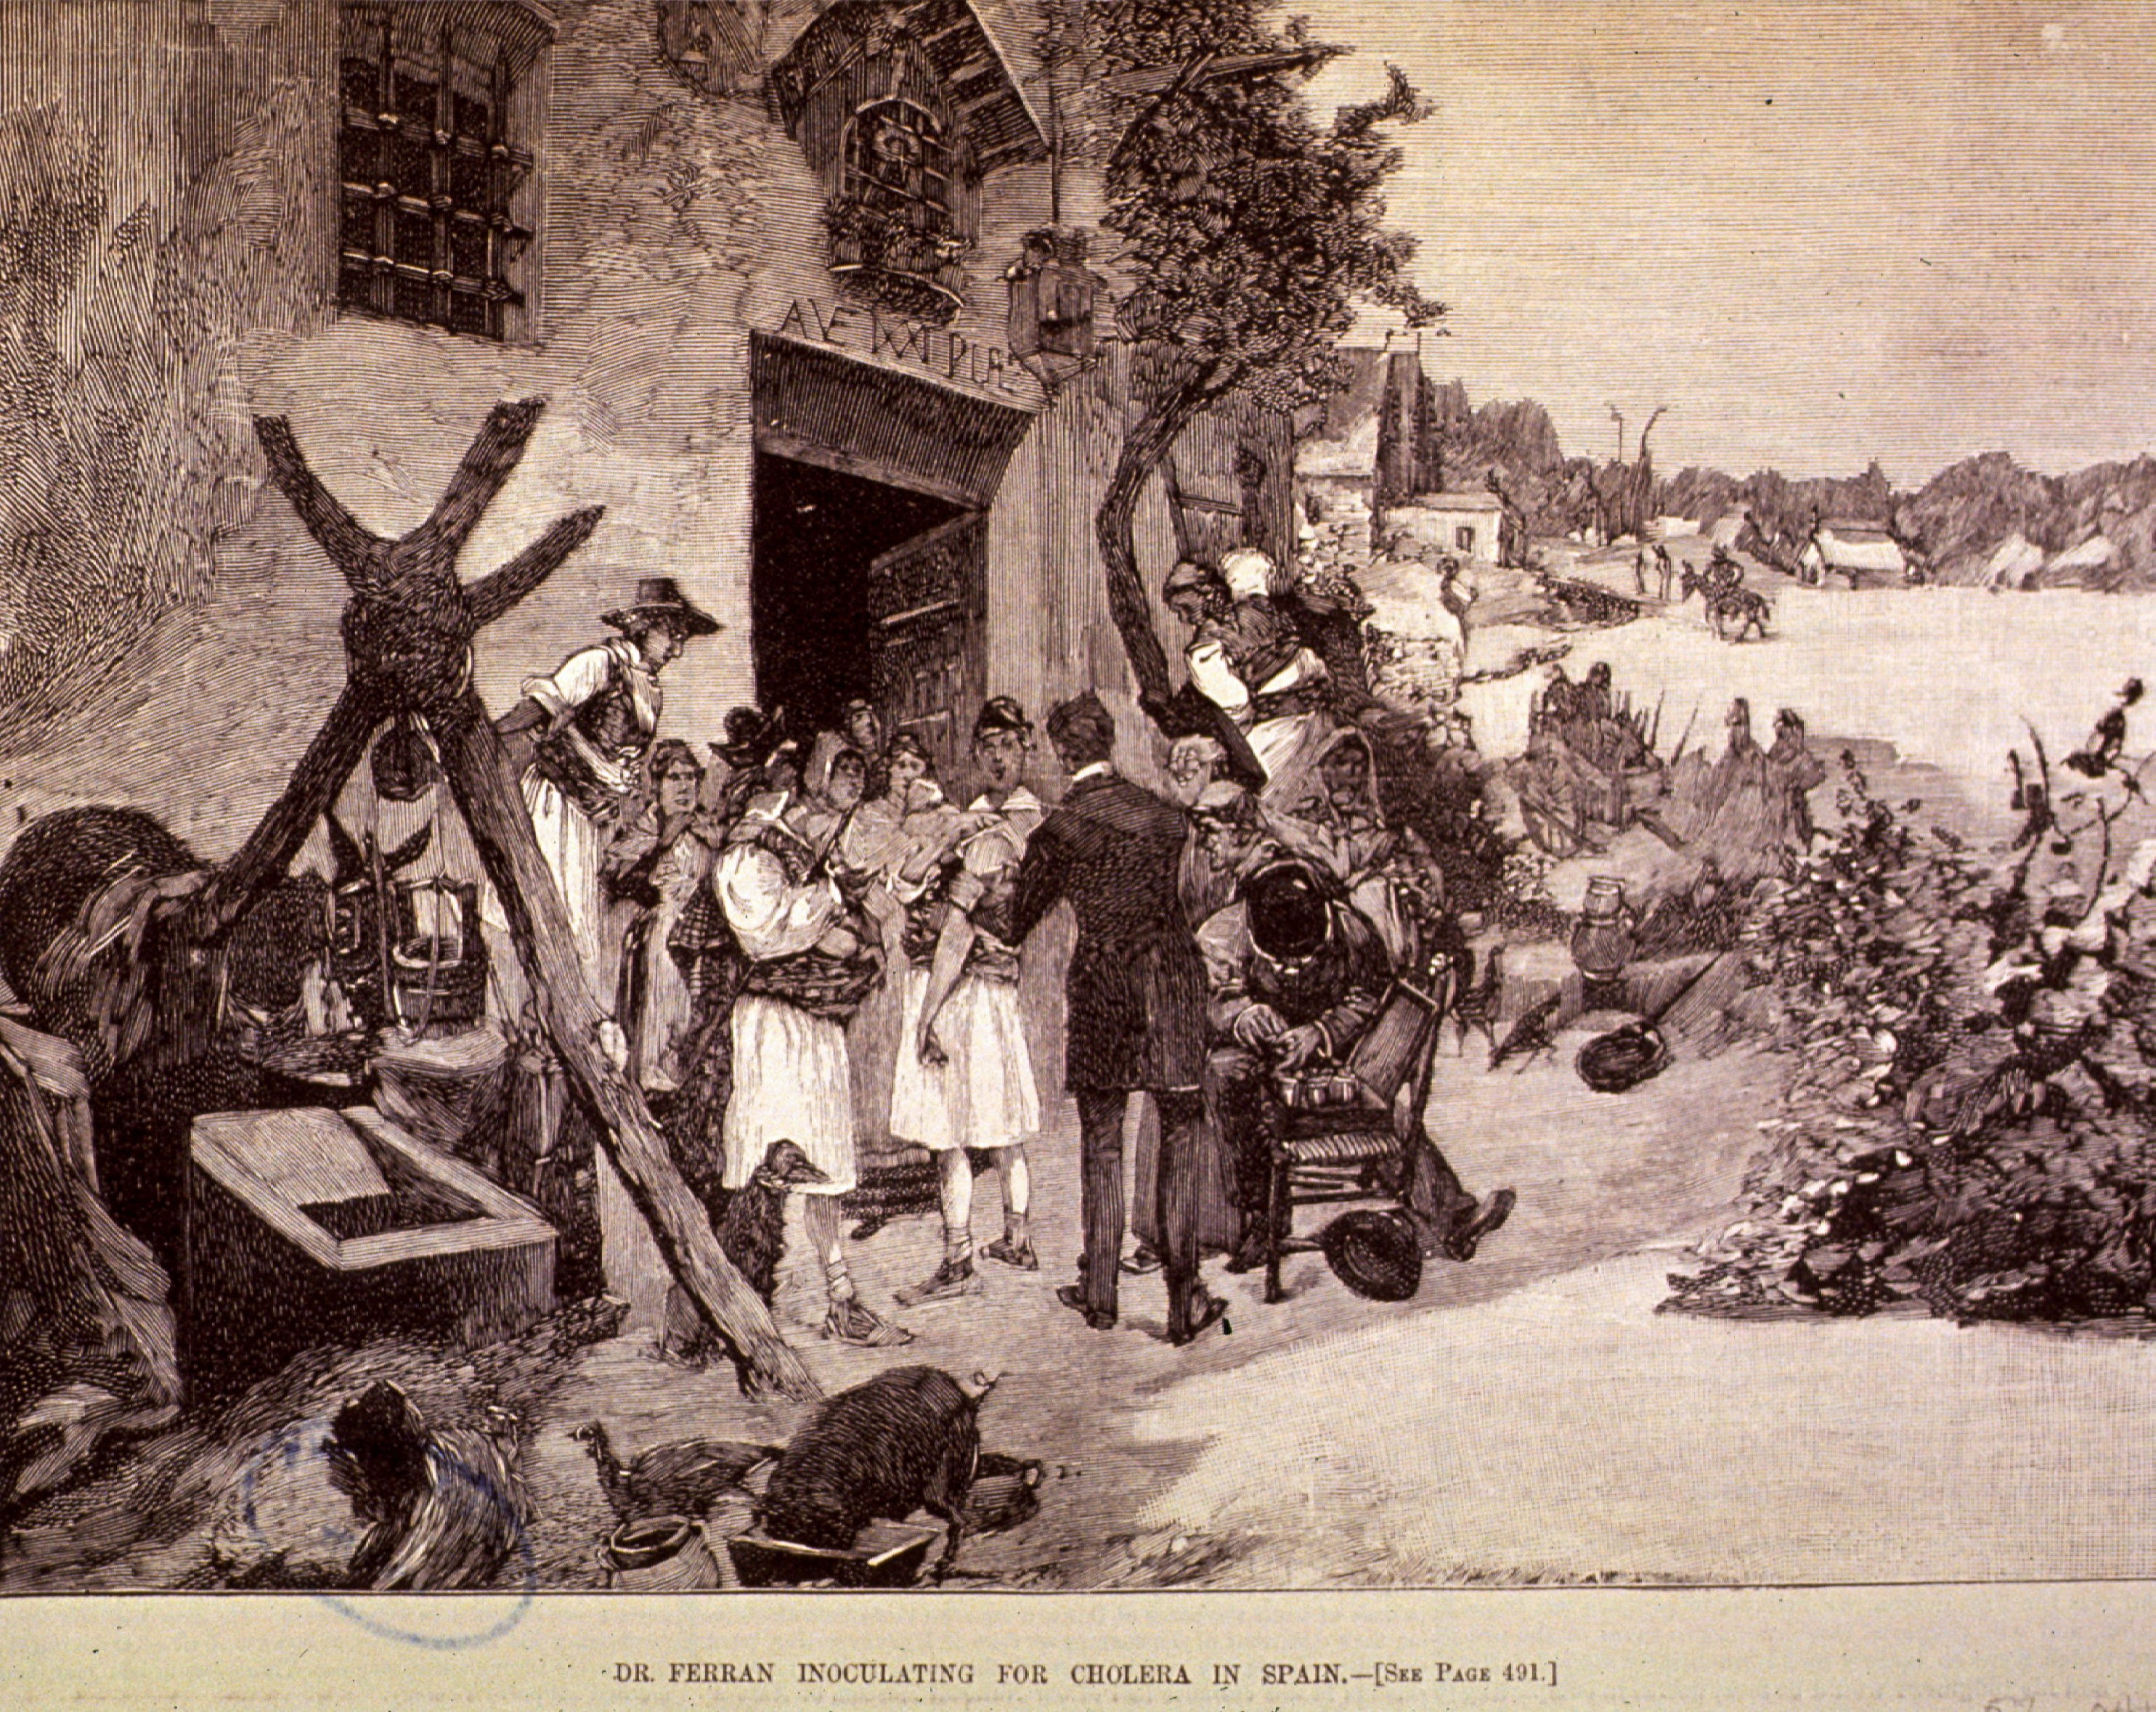 an etching showing people in the countryside getting inoculated against cholera